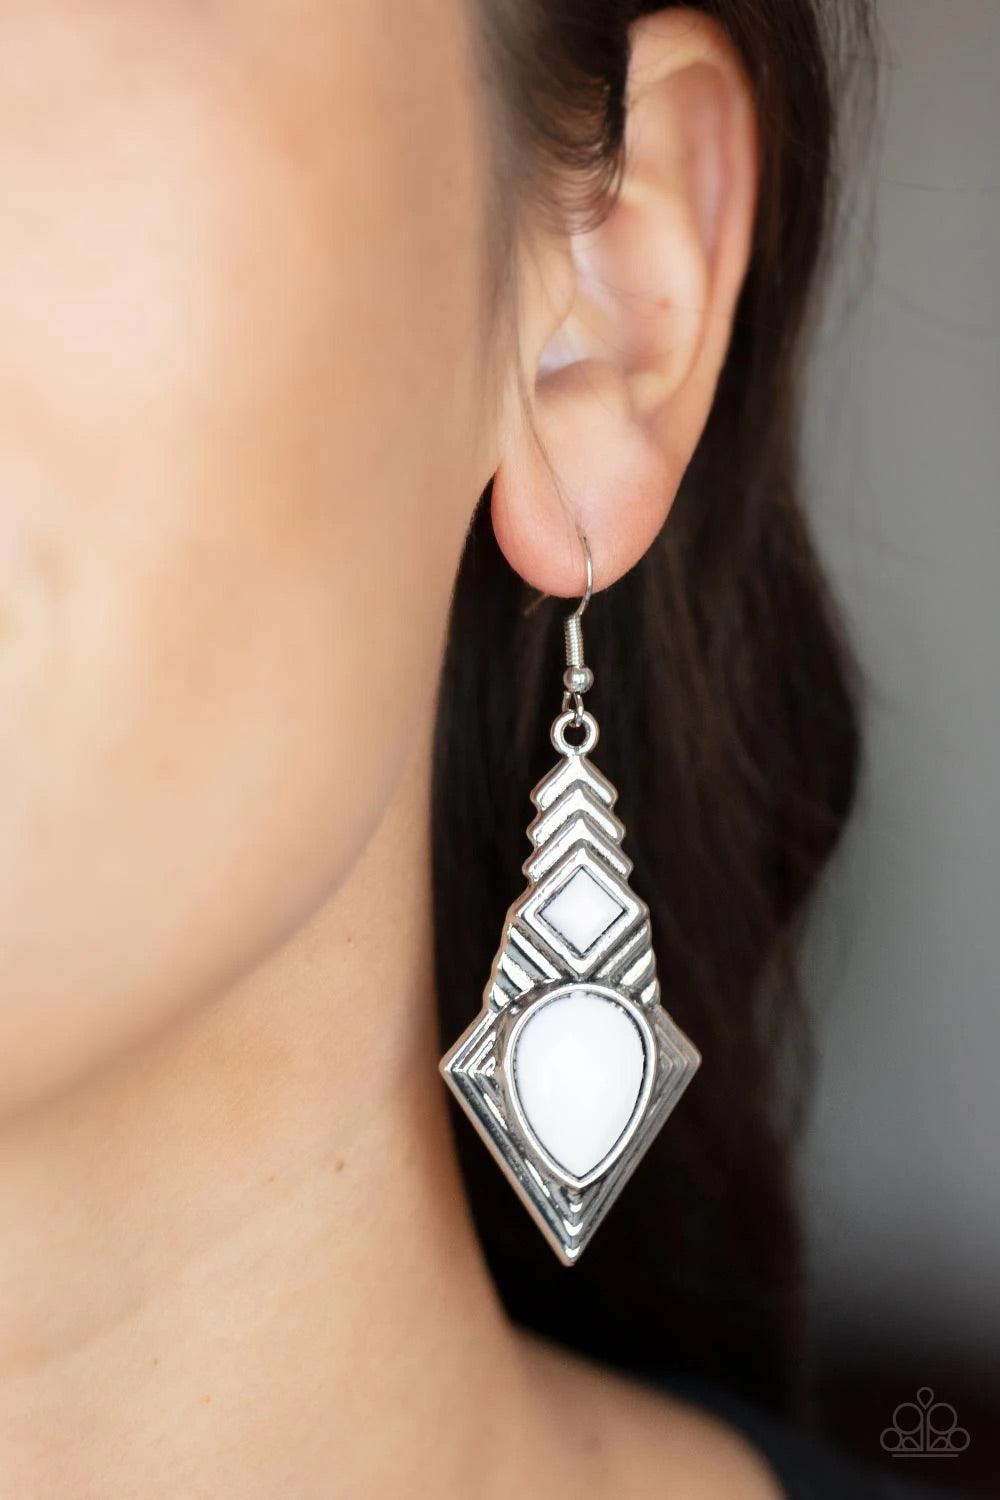 Paparazzi Accessories Stylishly Sonoran - White Faceted white square and teardrop beads are pressed into a silver geometric frame rippling with stacked linear patterns. Earring attaches to a standard fishhook fitting. Sold as one pair of earrings. Jewelry